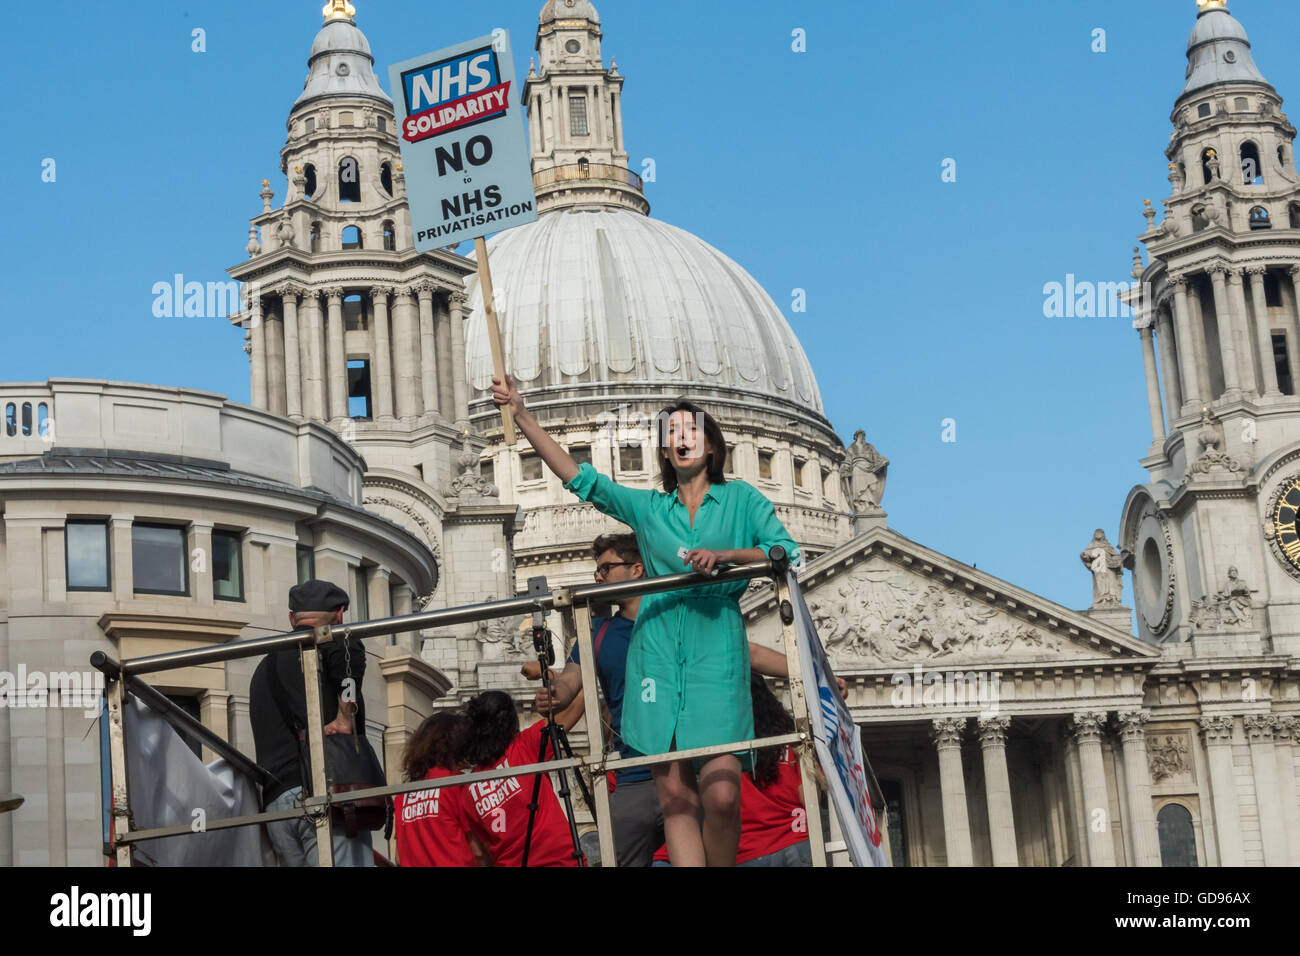 London, UK, 14th July 2016.  Junior doctor Aislinn Macklin-Doherty, one of the organisers of the event by NHS solidarity, a group of healthcare workers and supporters dedicated to saving a publicly funded, delivered and accountable NHS waves a placard on top of the FBU fire engineas it approaches St Paul's  Cathedral. Peter Marshall/Alamy Live News Stock Photo